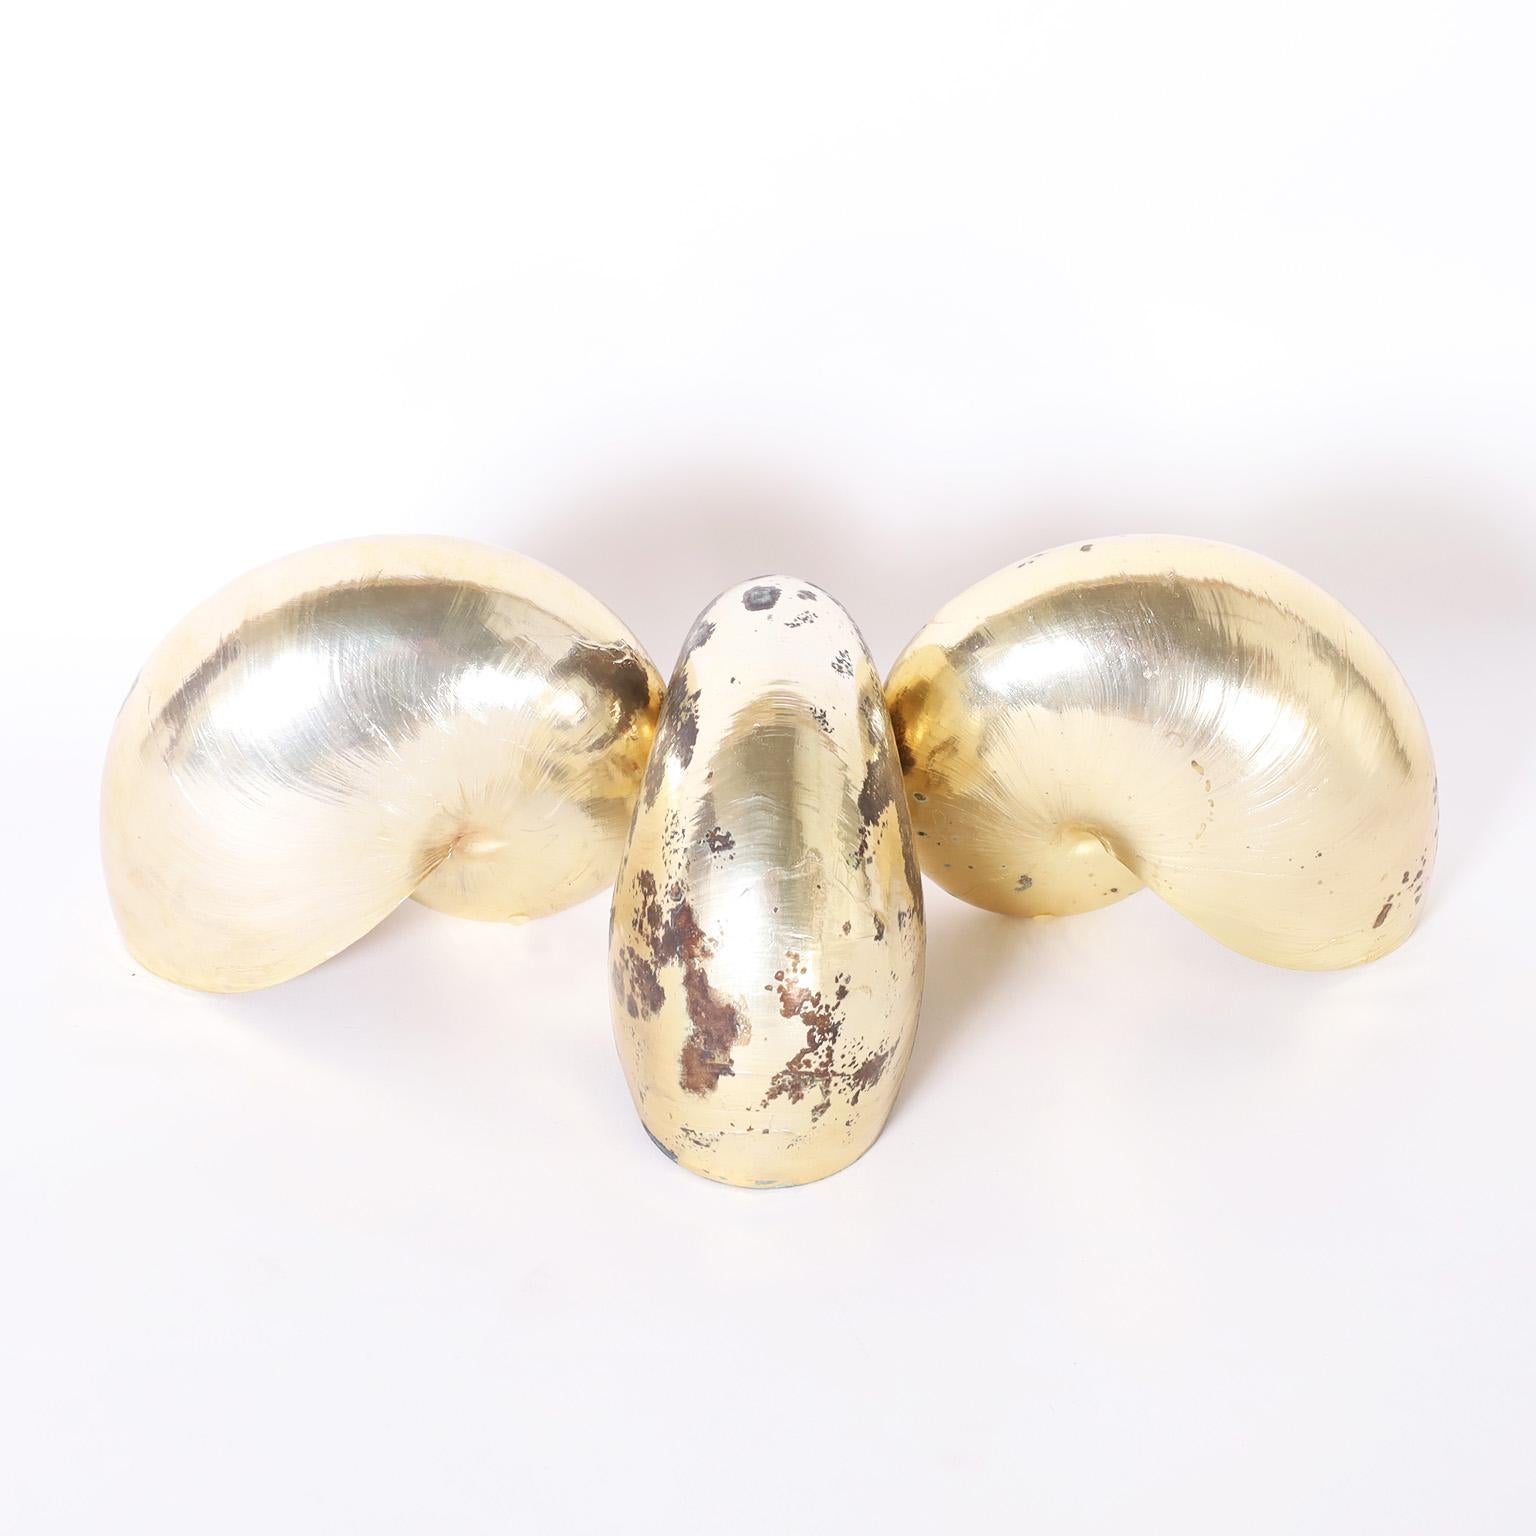 Group of three nautilus shells with their iconic form, gold plated with a copper under coat wearing through as a sculptural element.